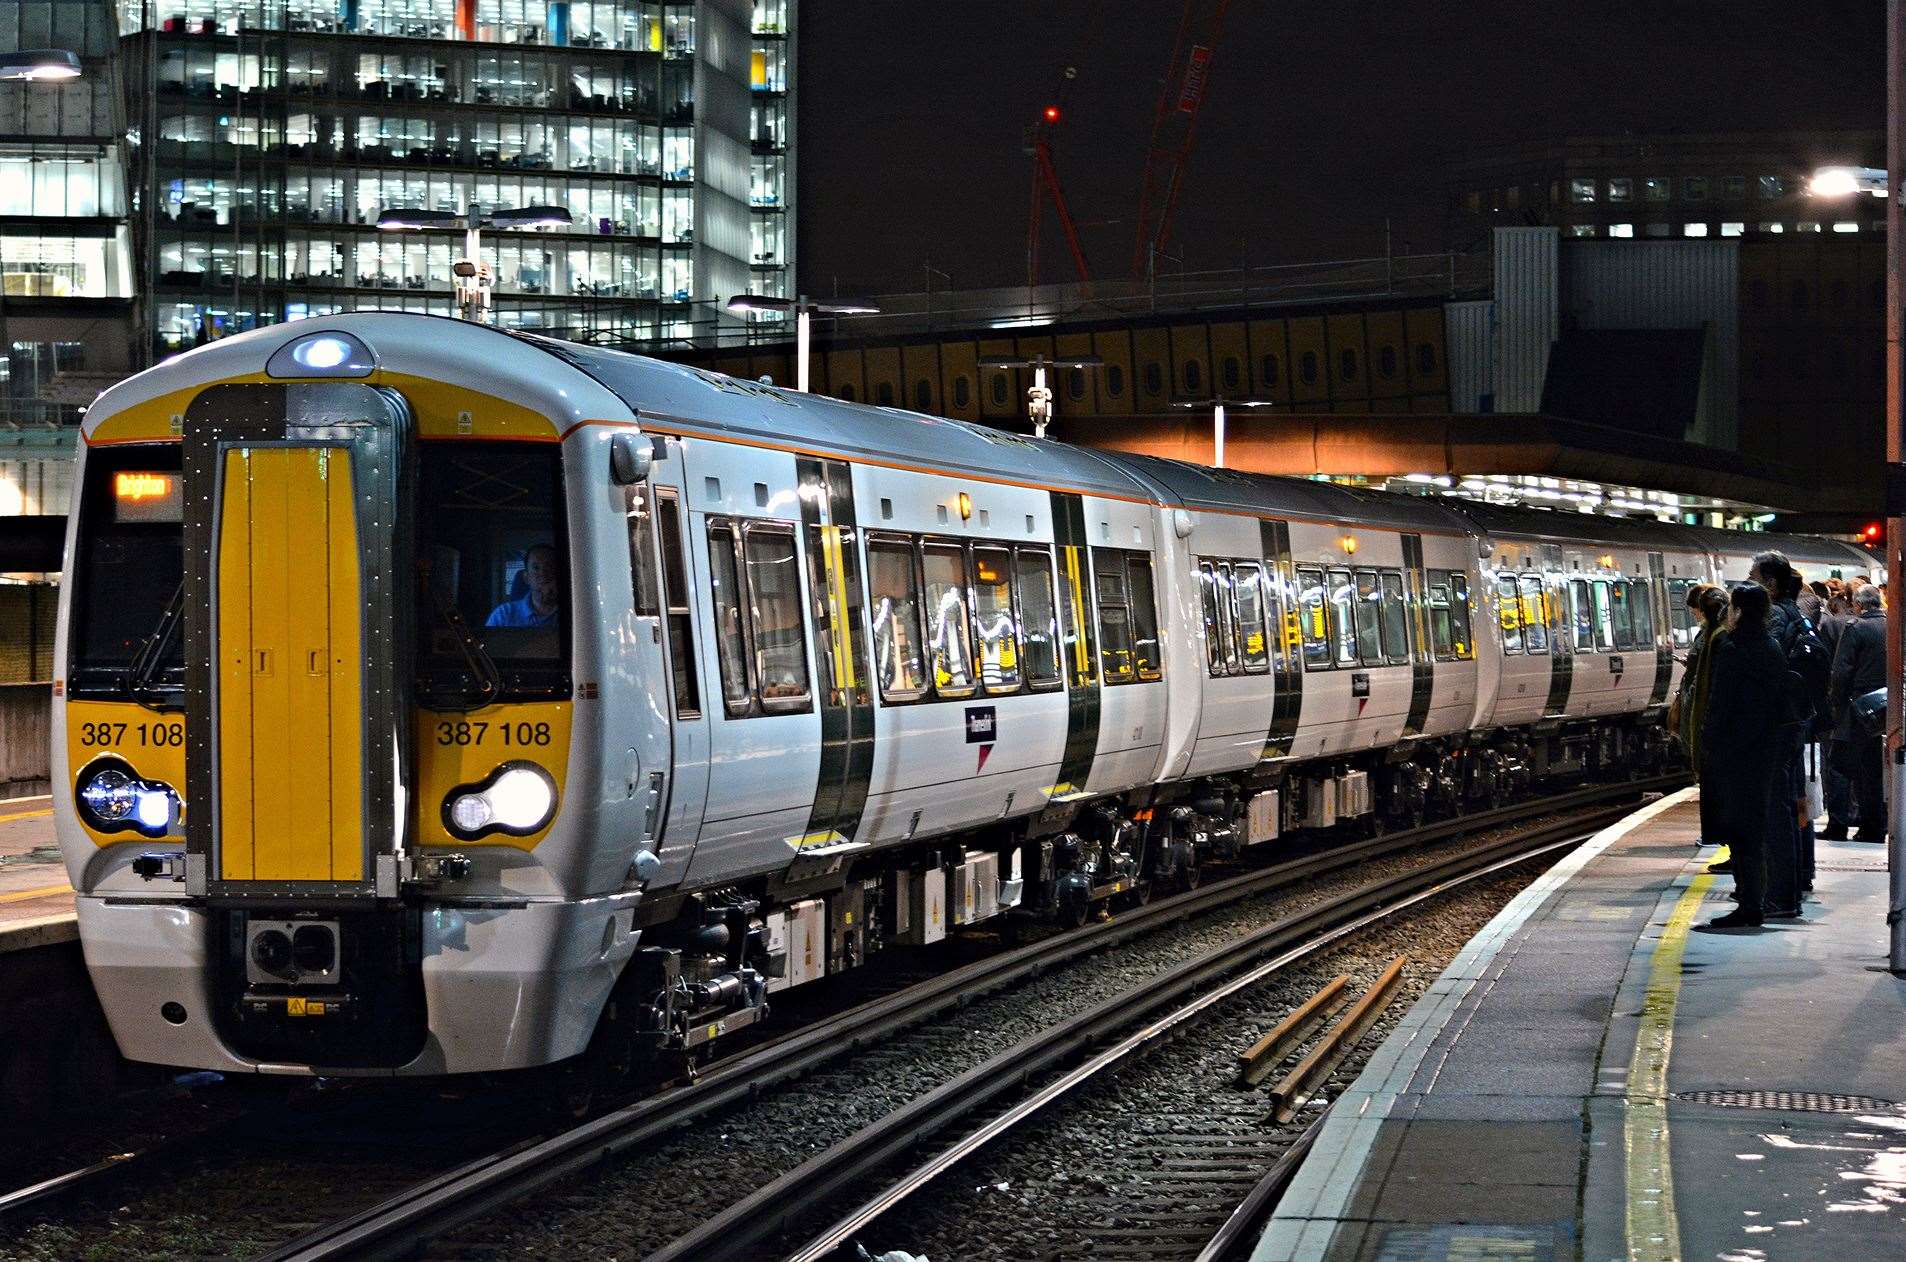 The proposals set out a number of extensions to national rail services and bus links